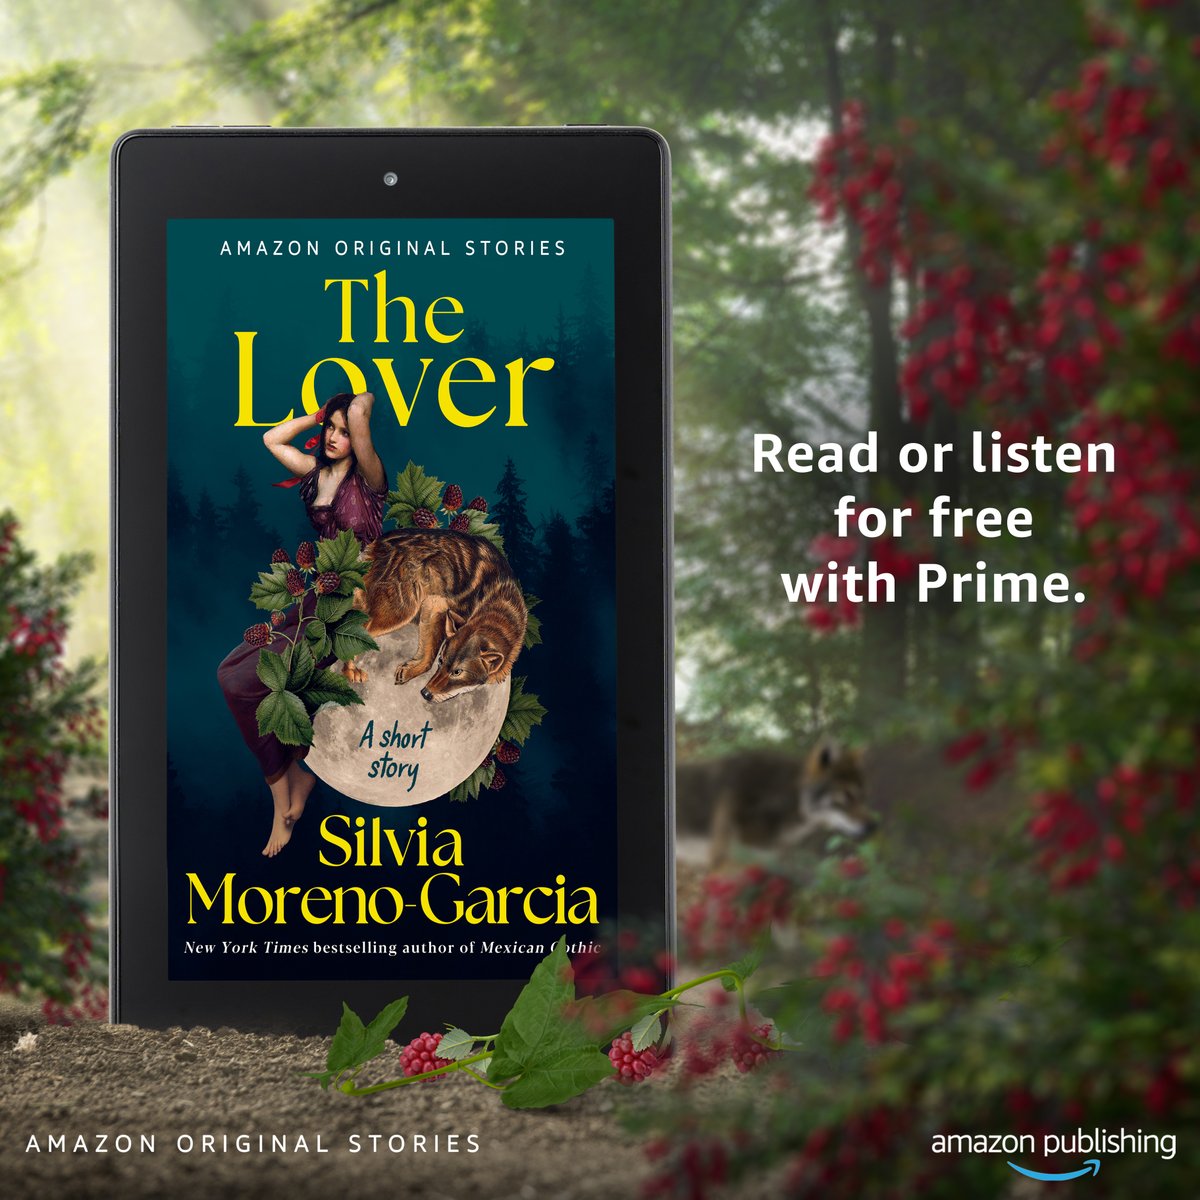 Go deep into the heart of the forest in this wickedly dark short story by @silviamg, the bestselling author of Mexican Gothic. Read and listen for free with Prime. Amazon.com/TheLover